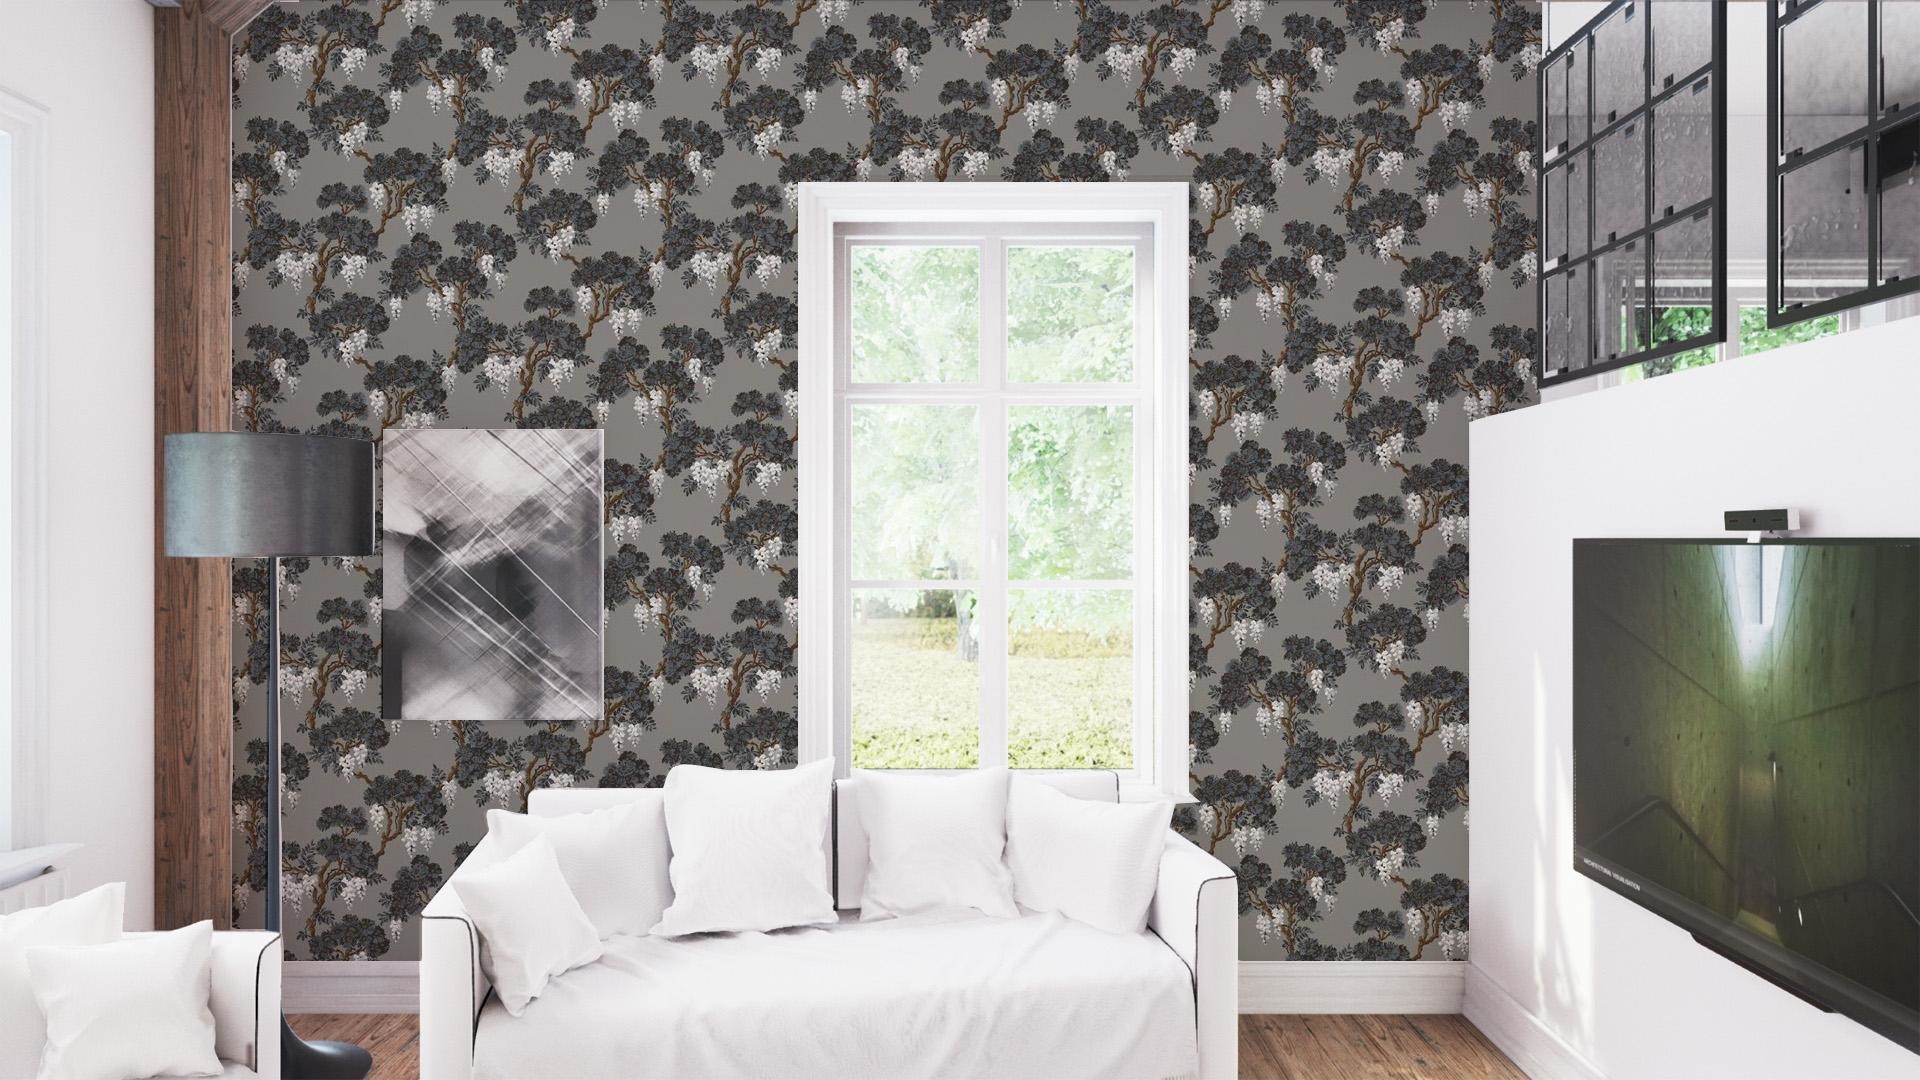 1920x1080 ... Cole & Son Wallpaper Frontier Wisteria Collection 89/10039 - Thumb ...